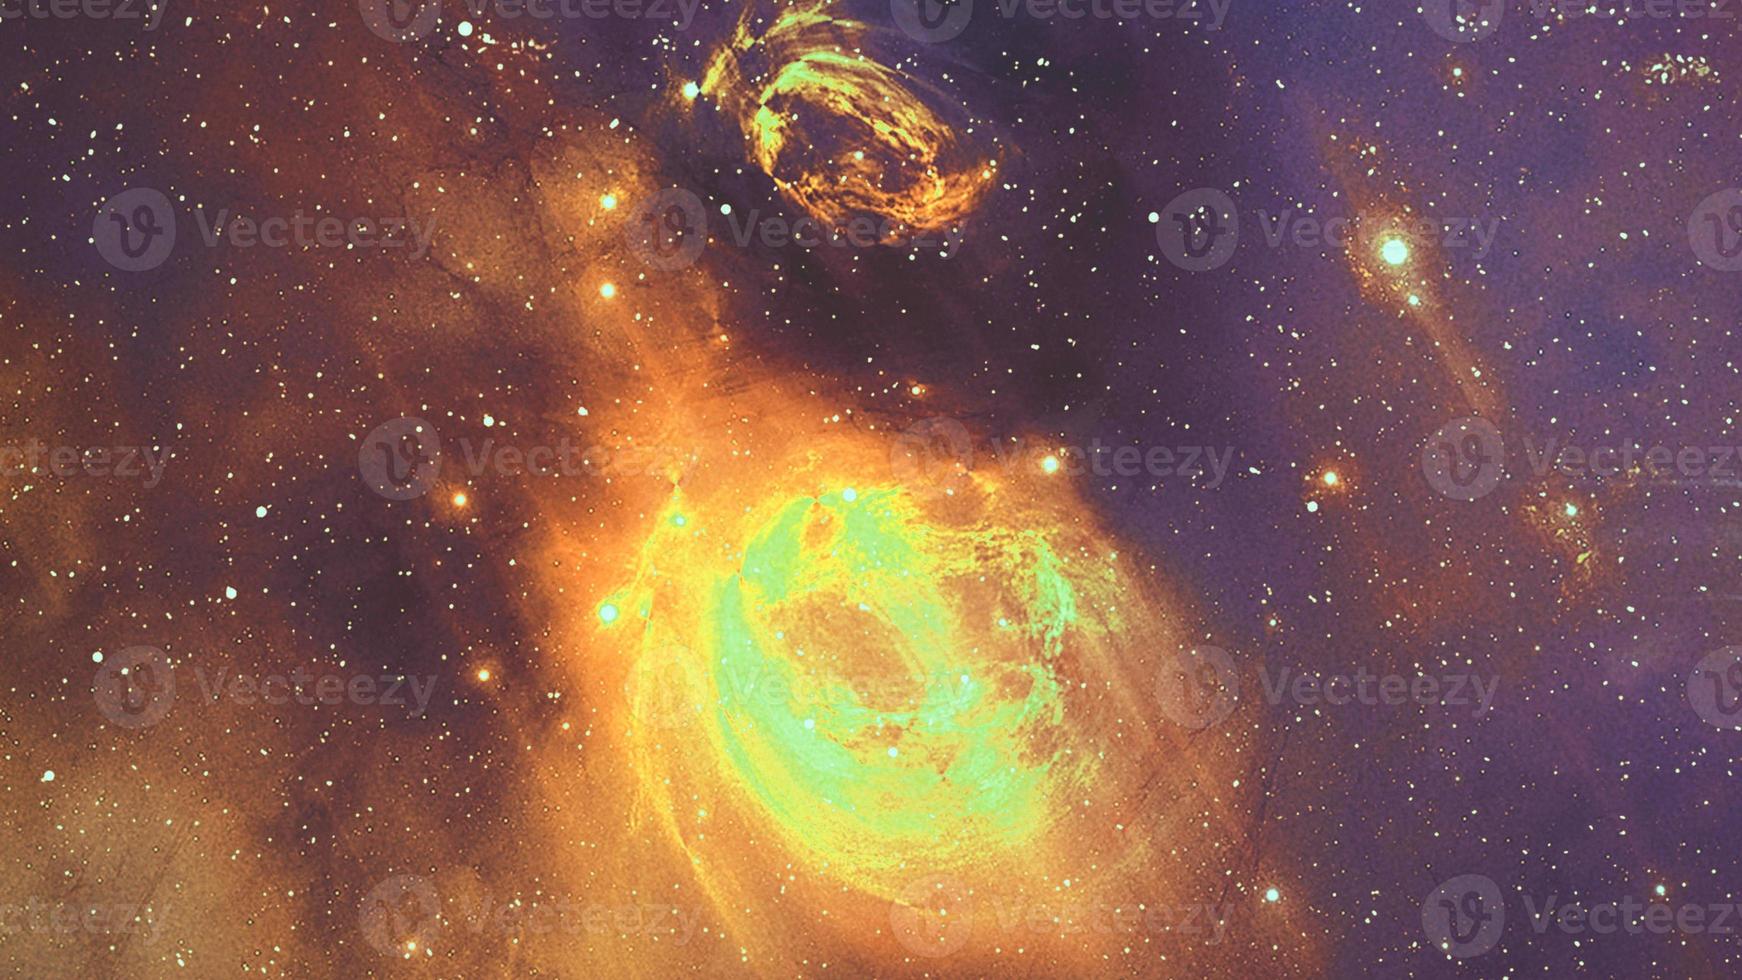 Infinite beautiful cosmos golden background with nebula, cluster of stars in outer space. Beauty of endless Universe filled stars.Cosmic art, science fiction wallpaper photo